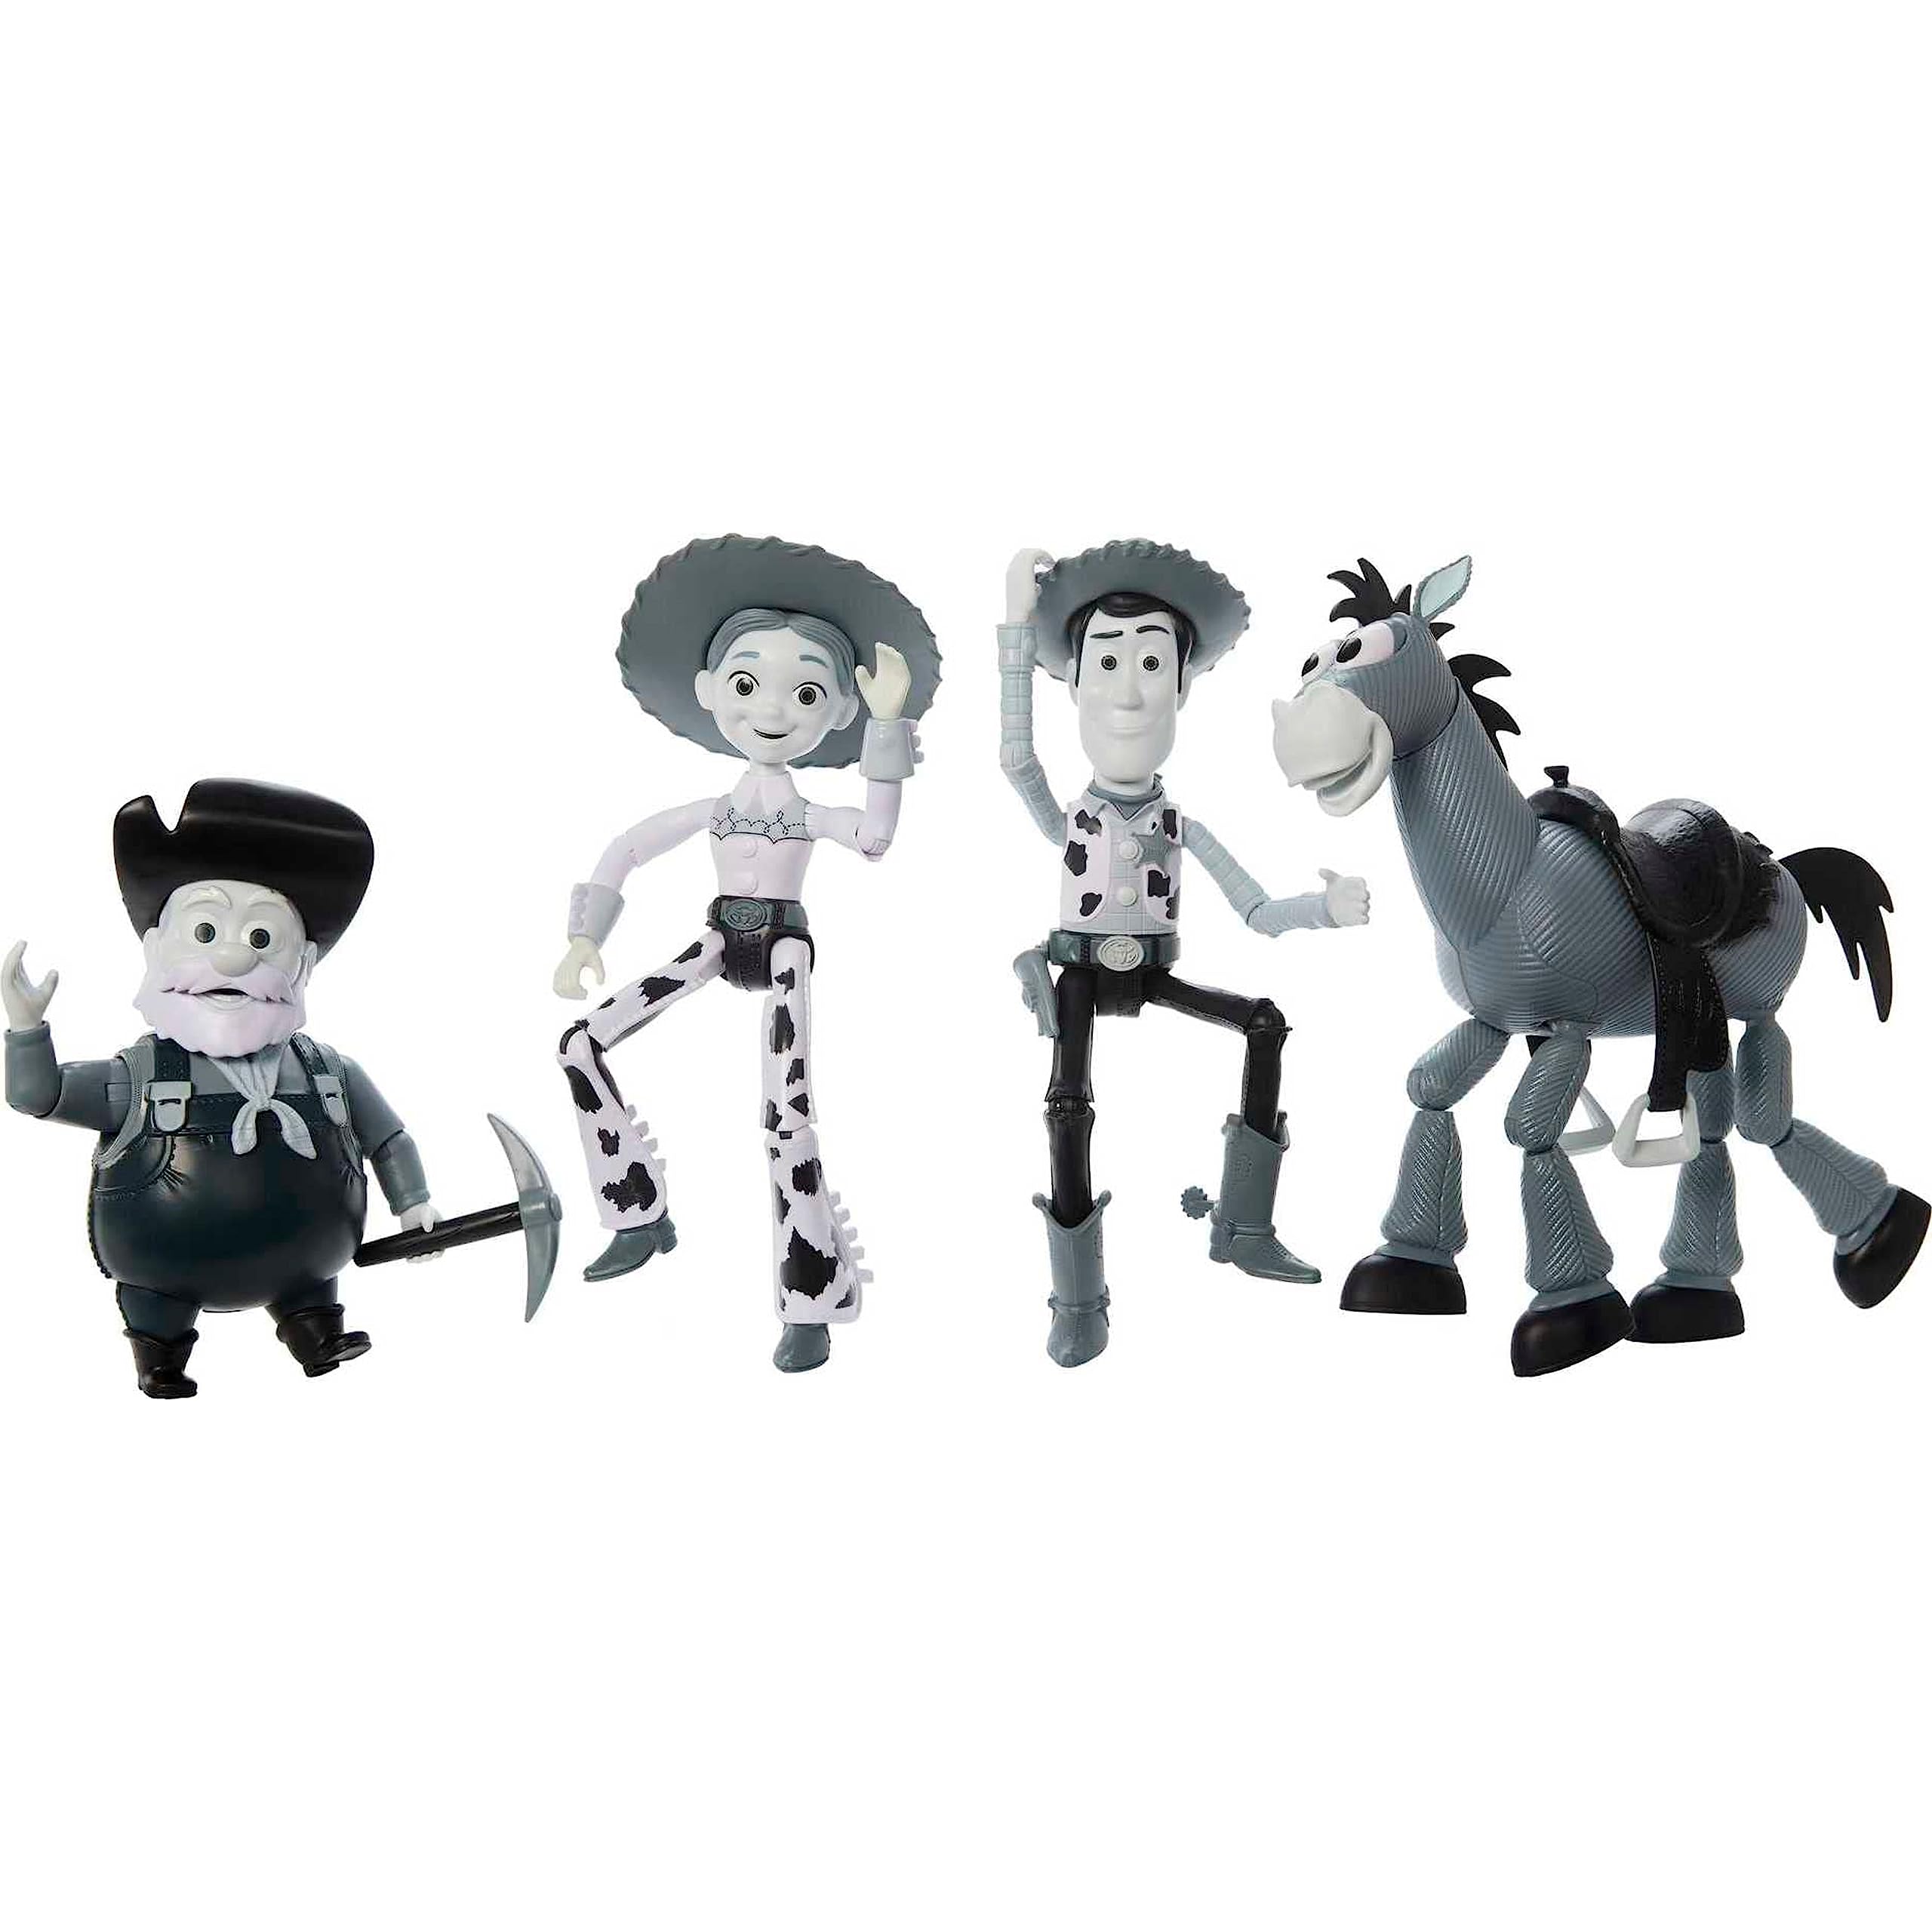 Disney and Pixar Toy Story Set of 4 Action Figures with Mon0Chromatic Woody, Jessie, Bullseye & Stinky Pete, Woody's Roundup, 7-in Scale (Amazon Exclusive)